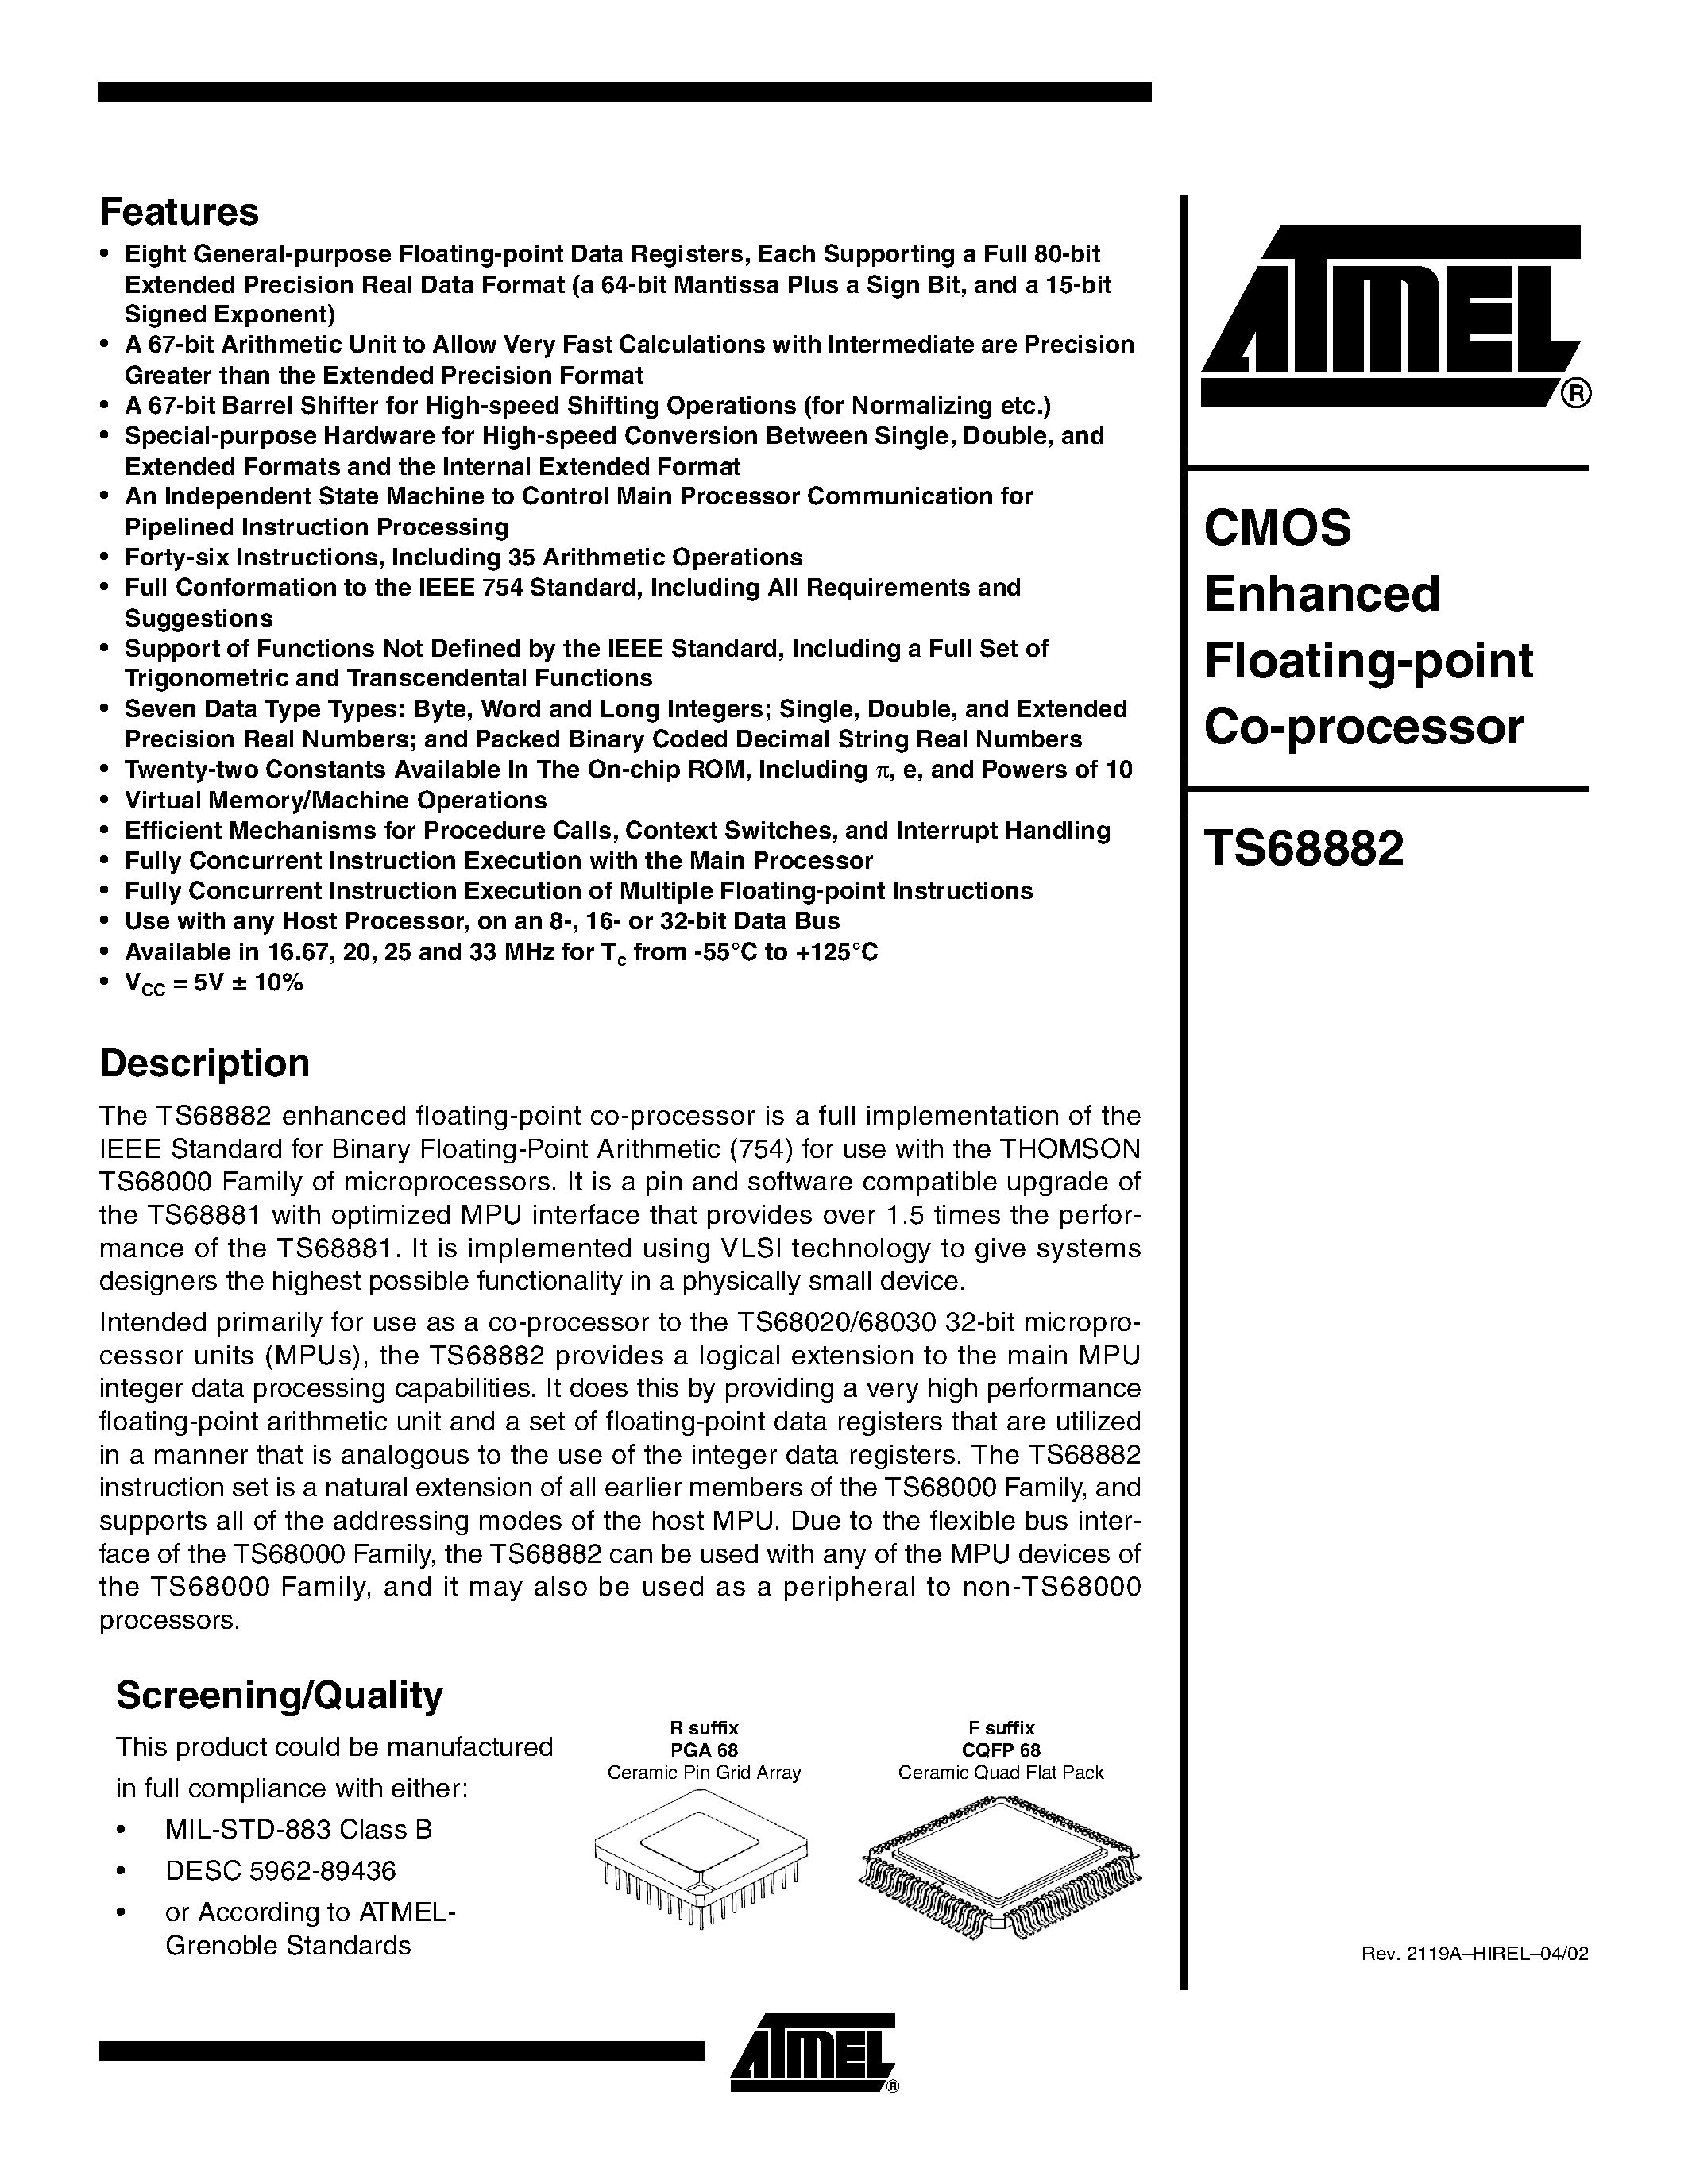 Datasheet TS68882MR20 - CMOS Enhanced Floating-point Co-processor page 1